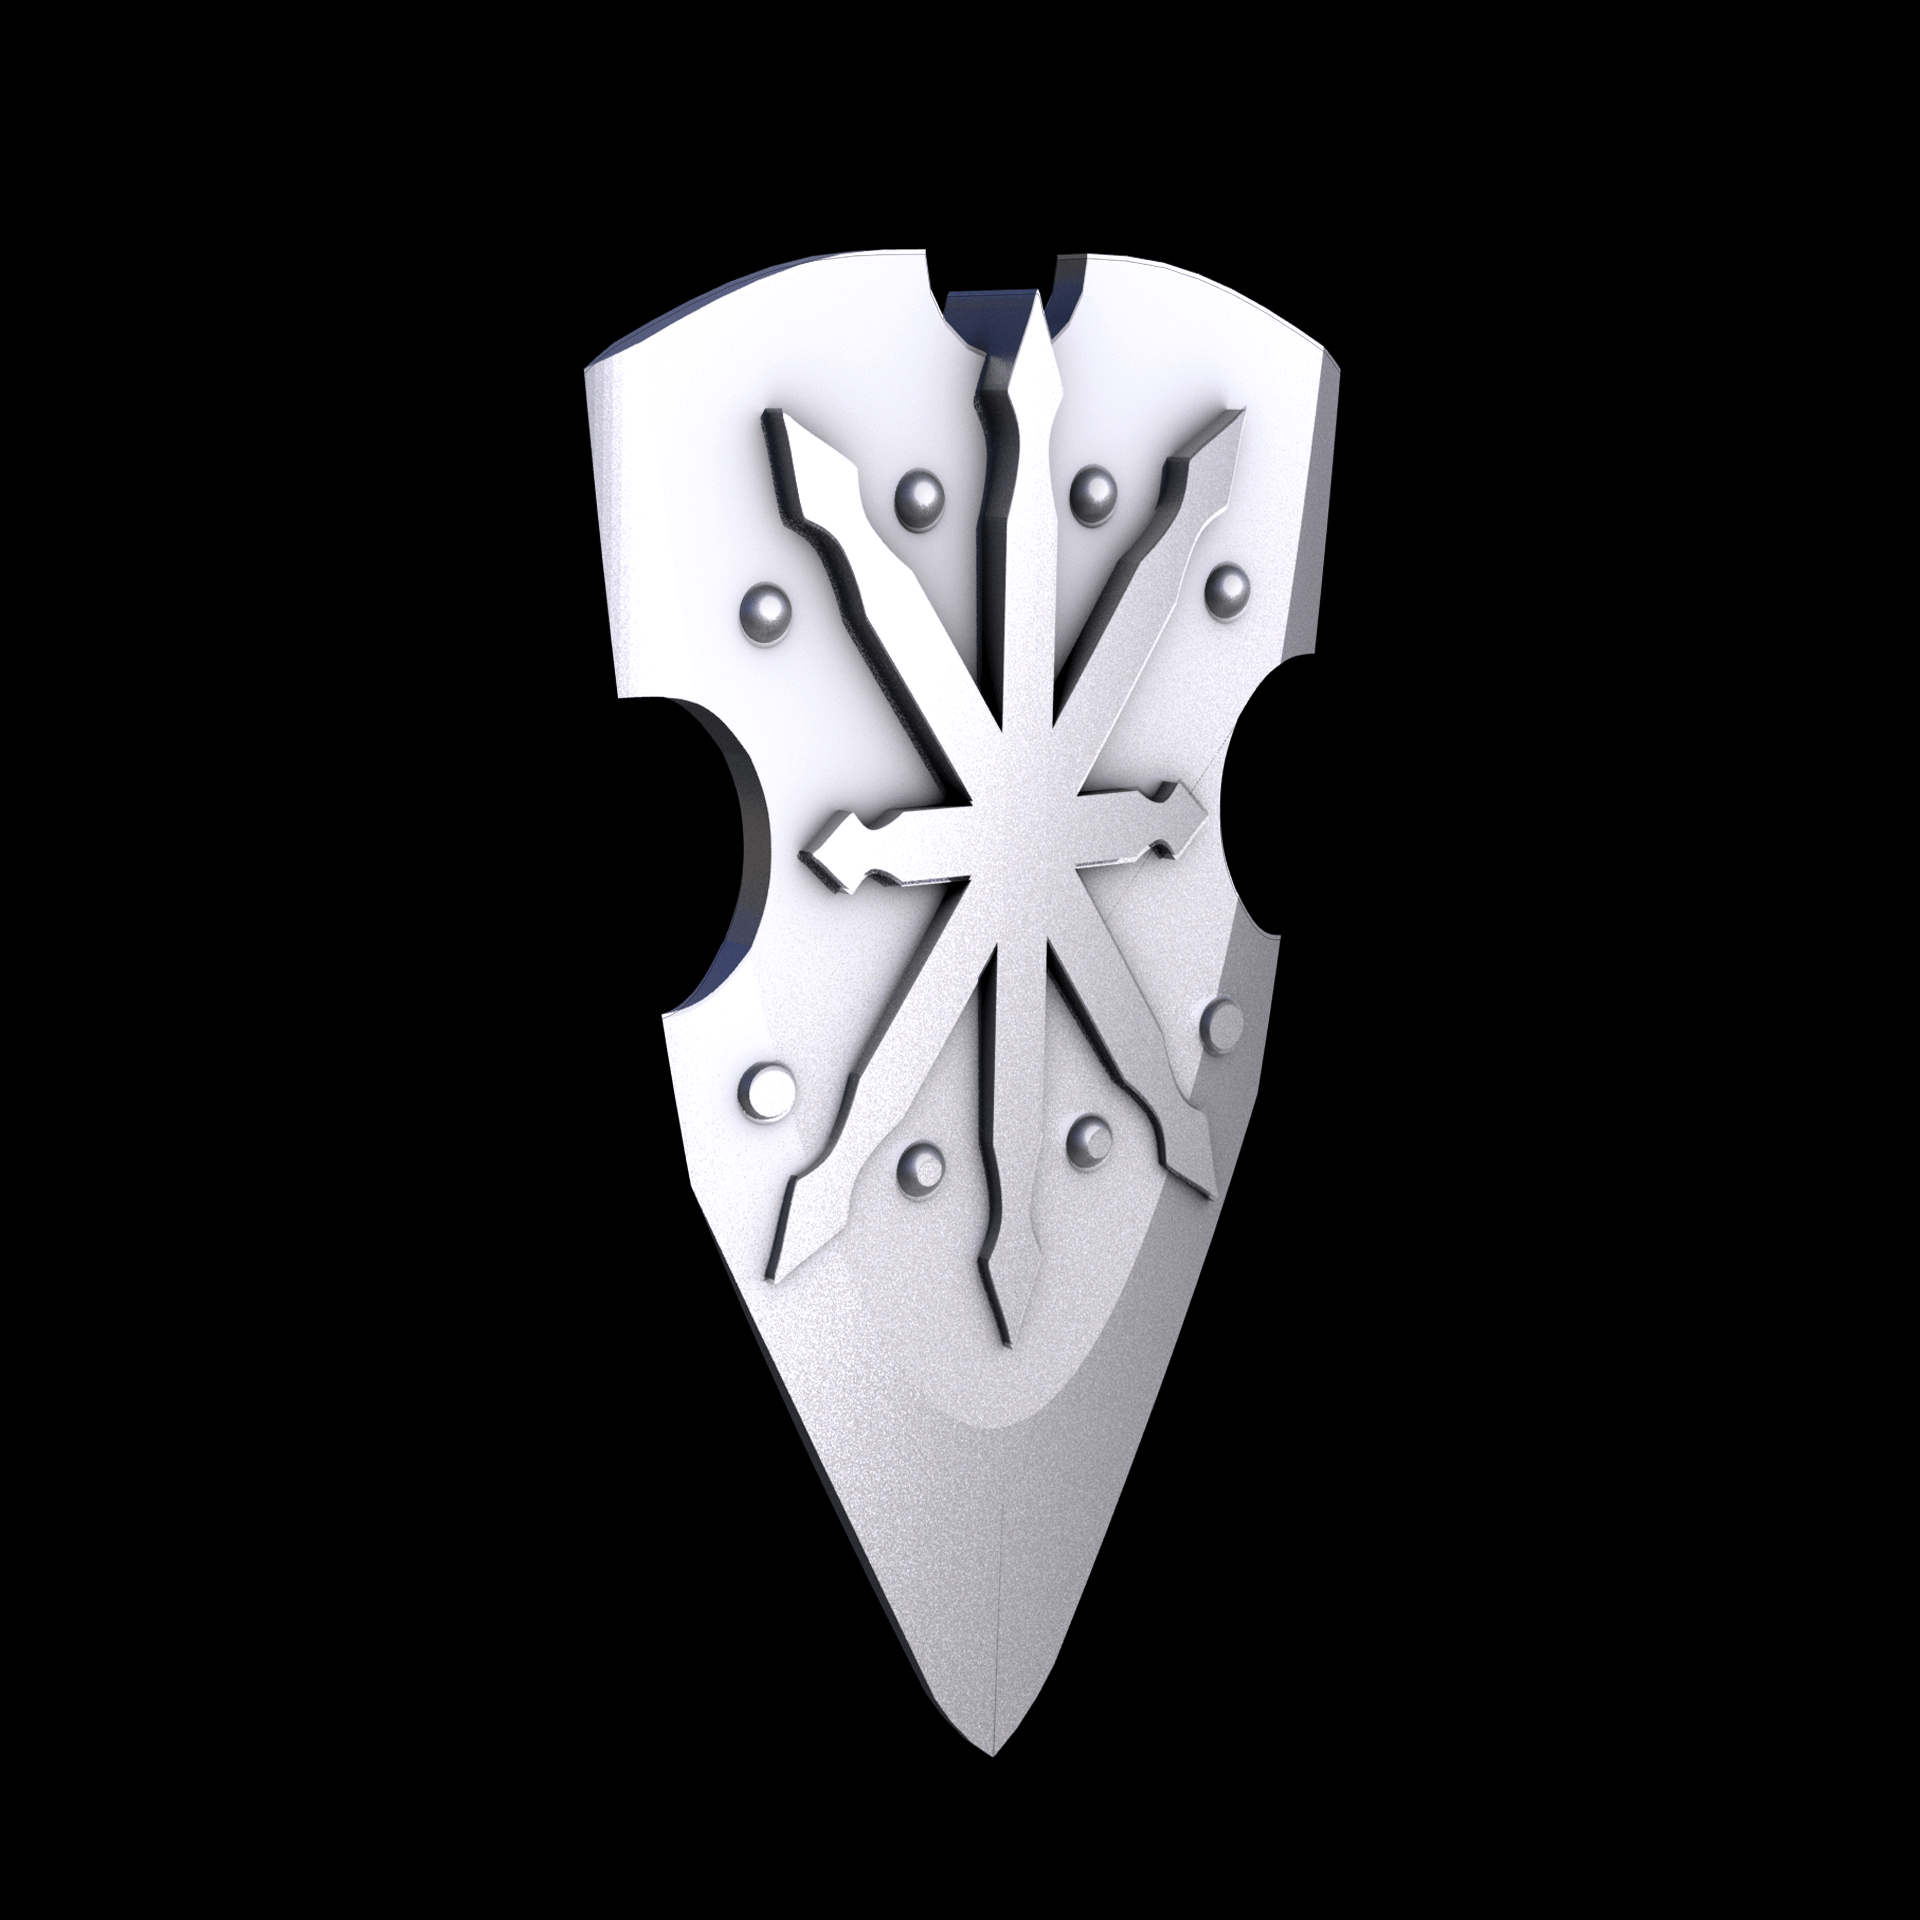 Stainless Steel 316L, manufactured using 3D printing, and media blasted after sintering, for a semi matte, rough surface finish.